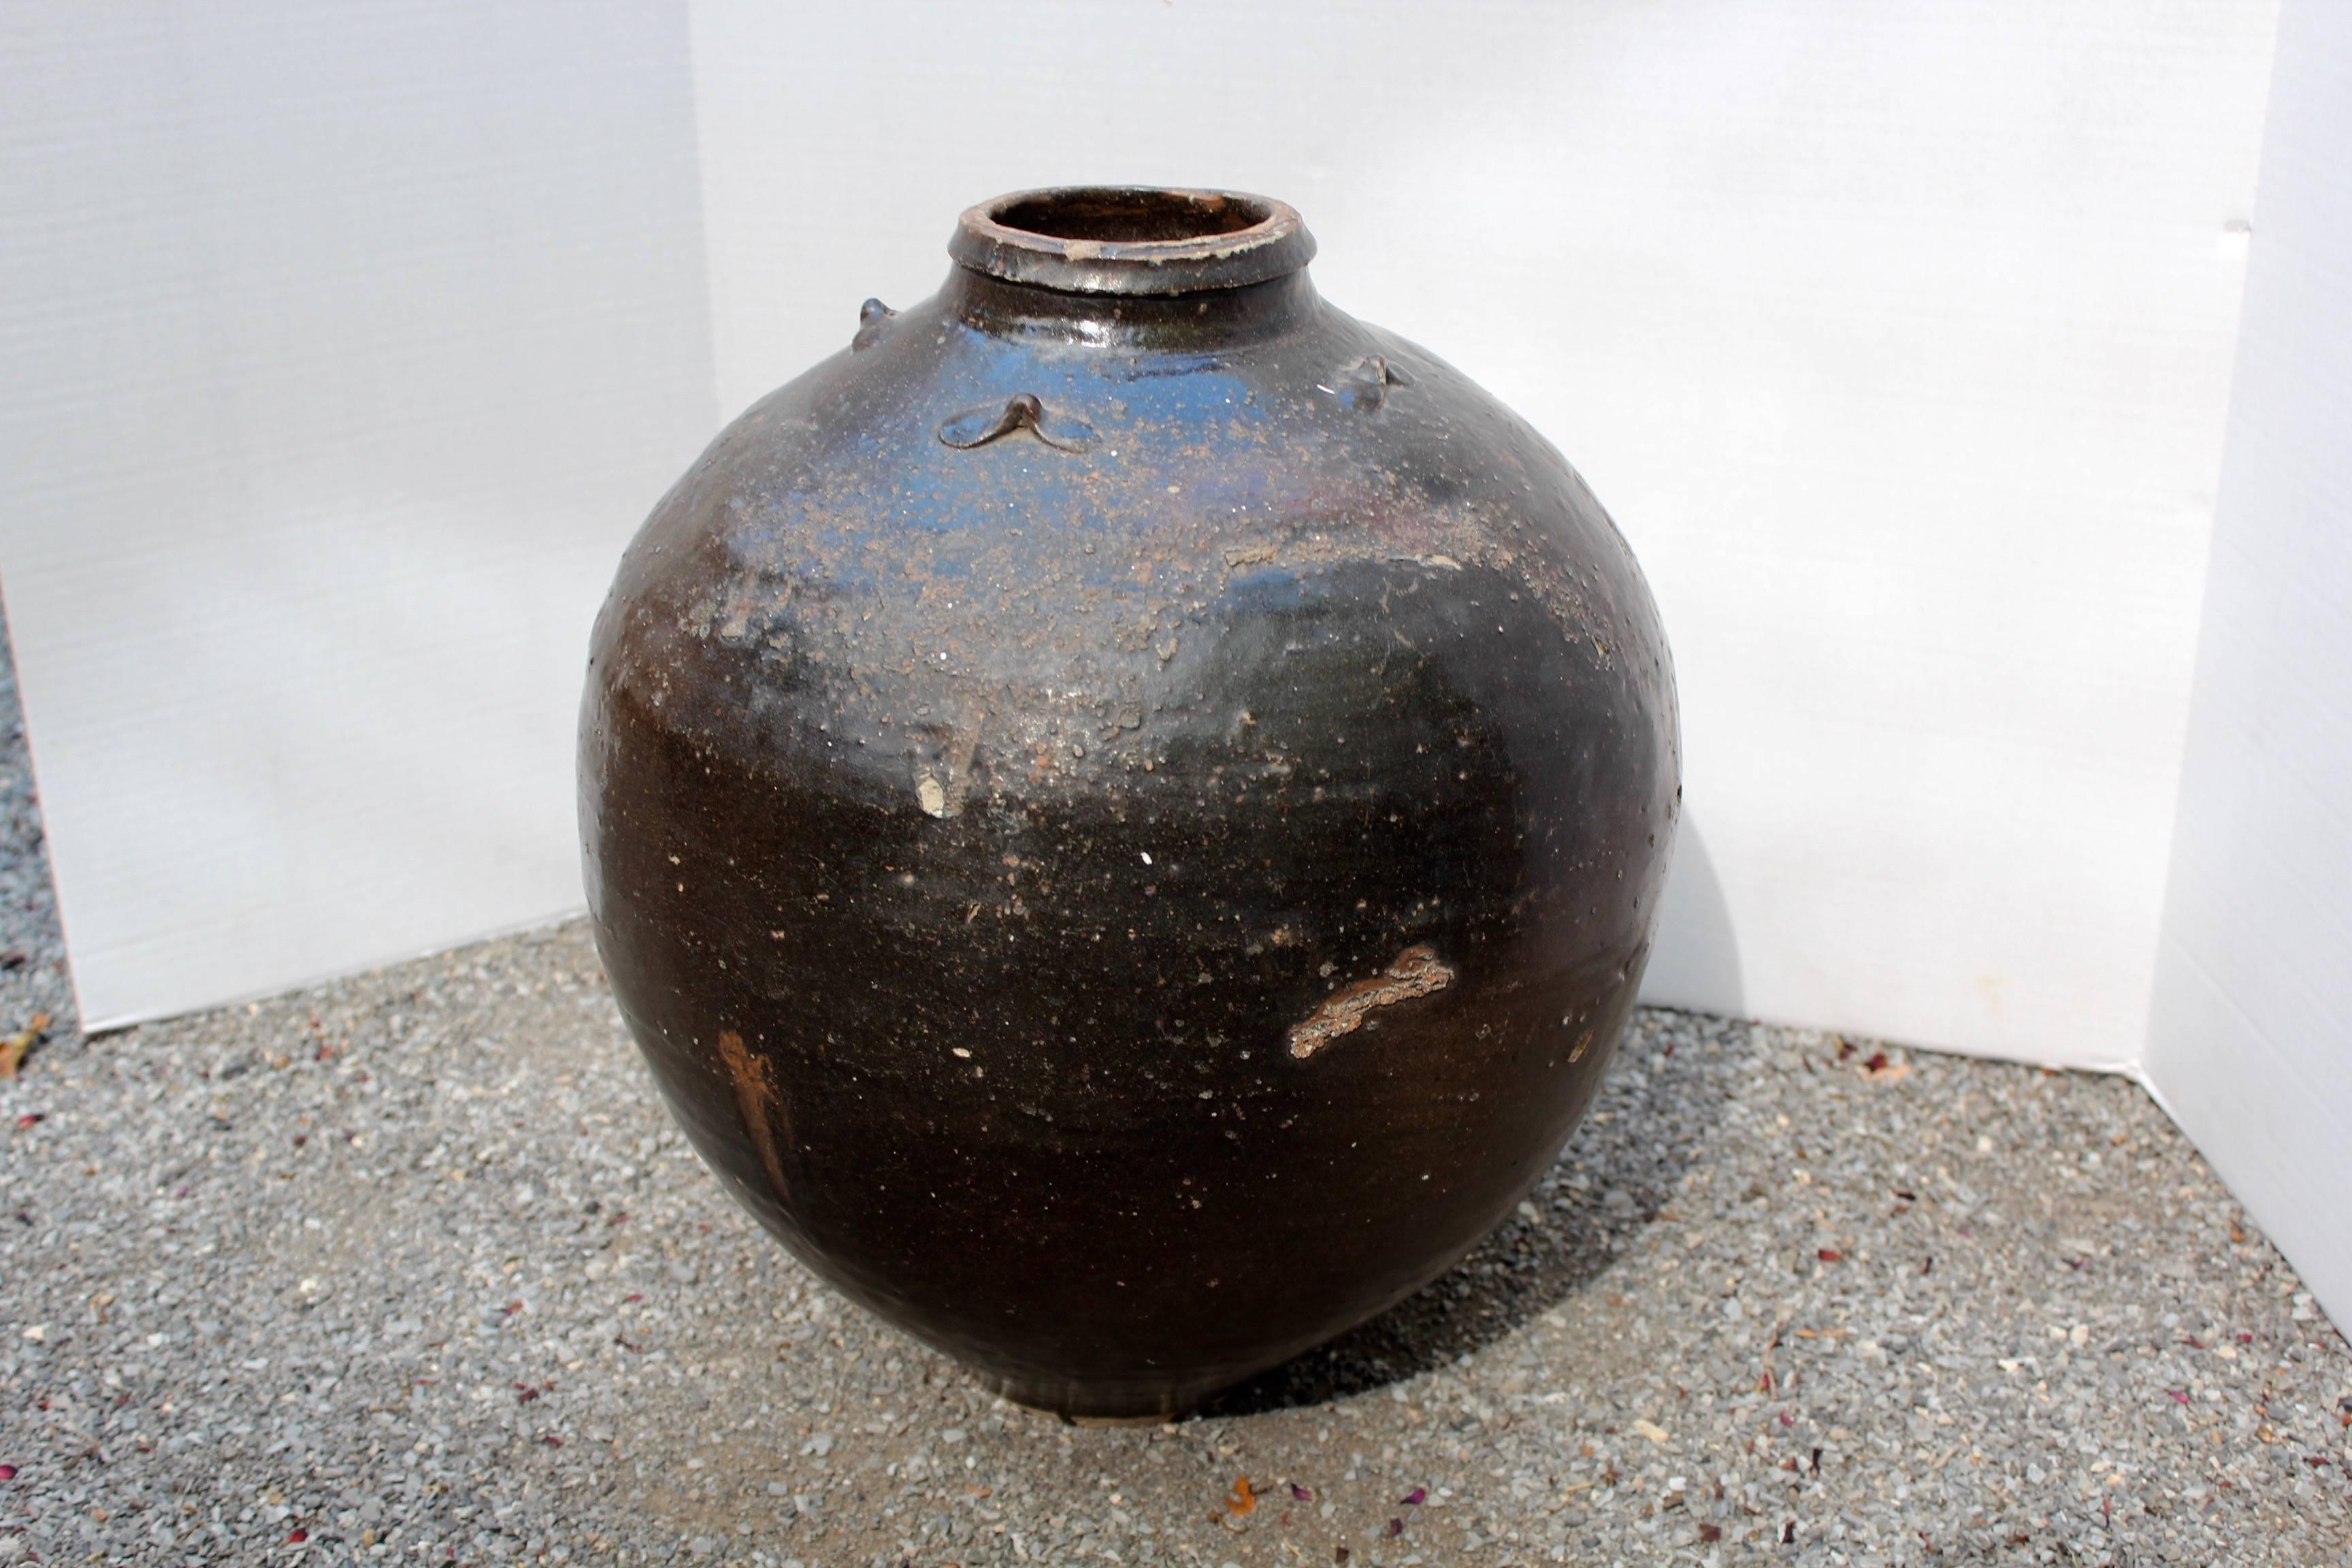 Antique Asian storage jar.
Stoneware with dark brown iron glaze jar with four texture lugs around the top. 
Oviform jar with baluster shape top and bold glazed texture.